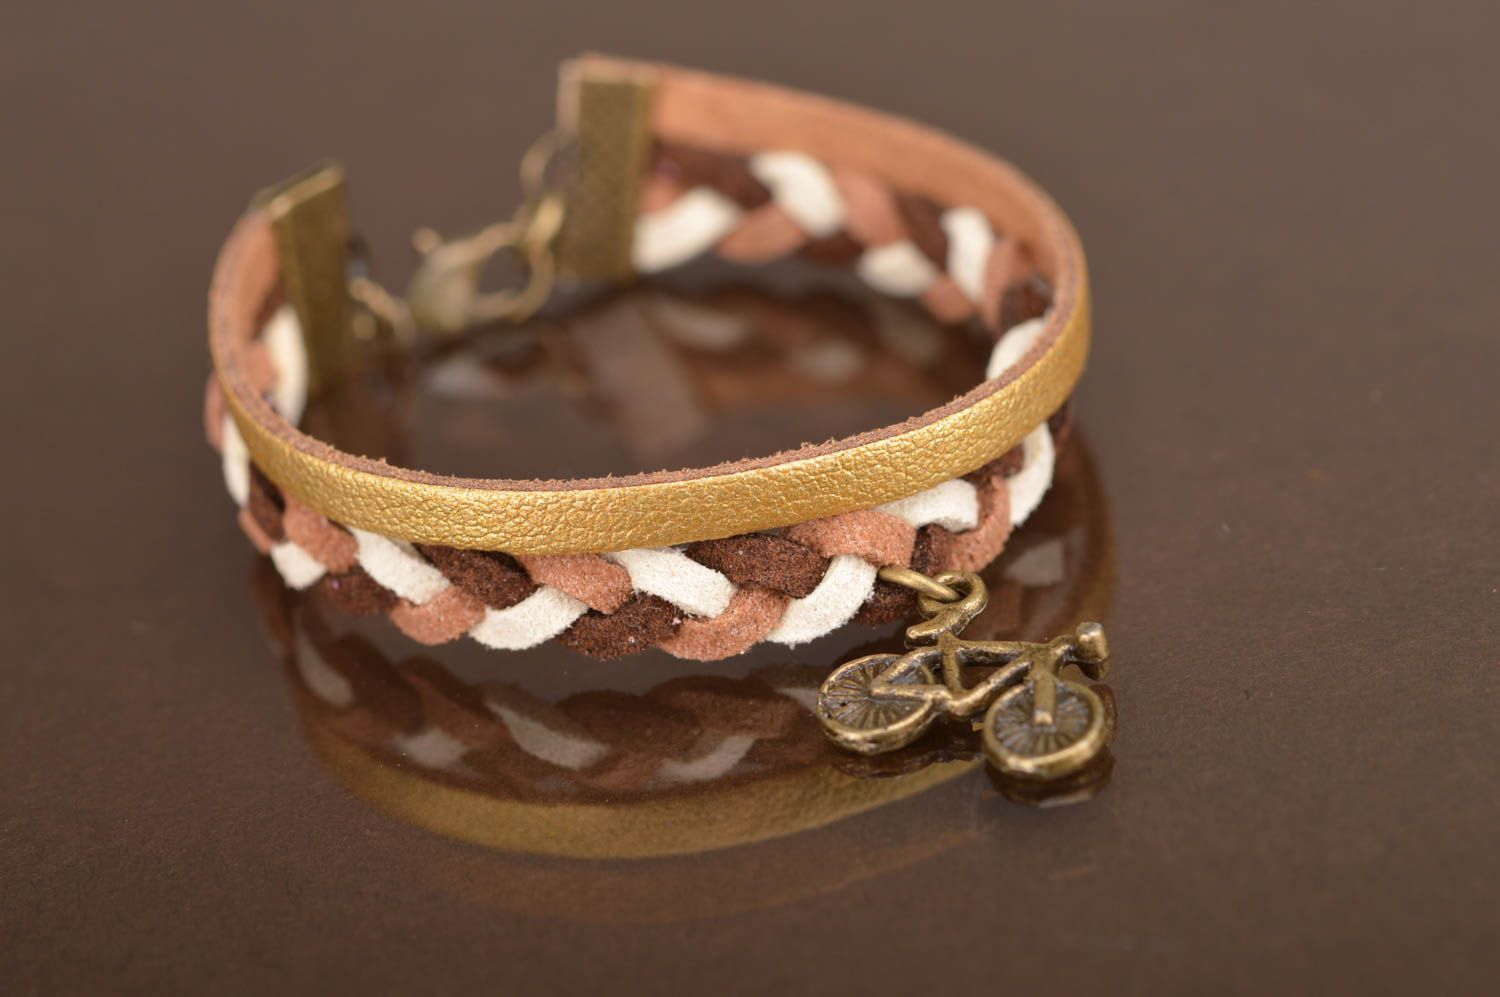 Handmade leather wrist bracelet with suede cord and metal charm Bicycle photo 3